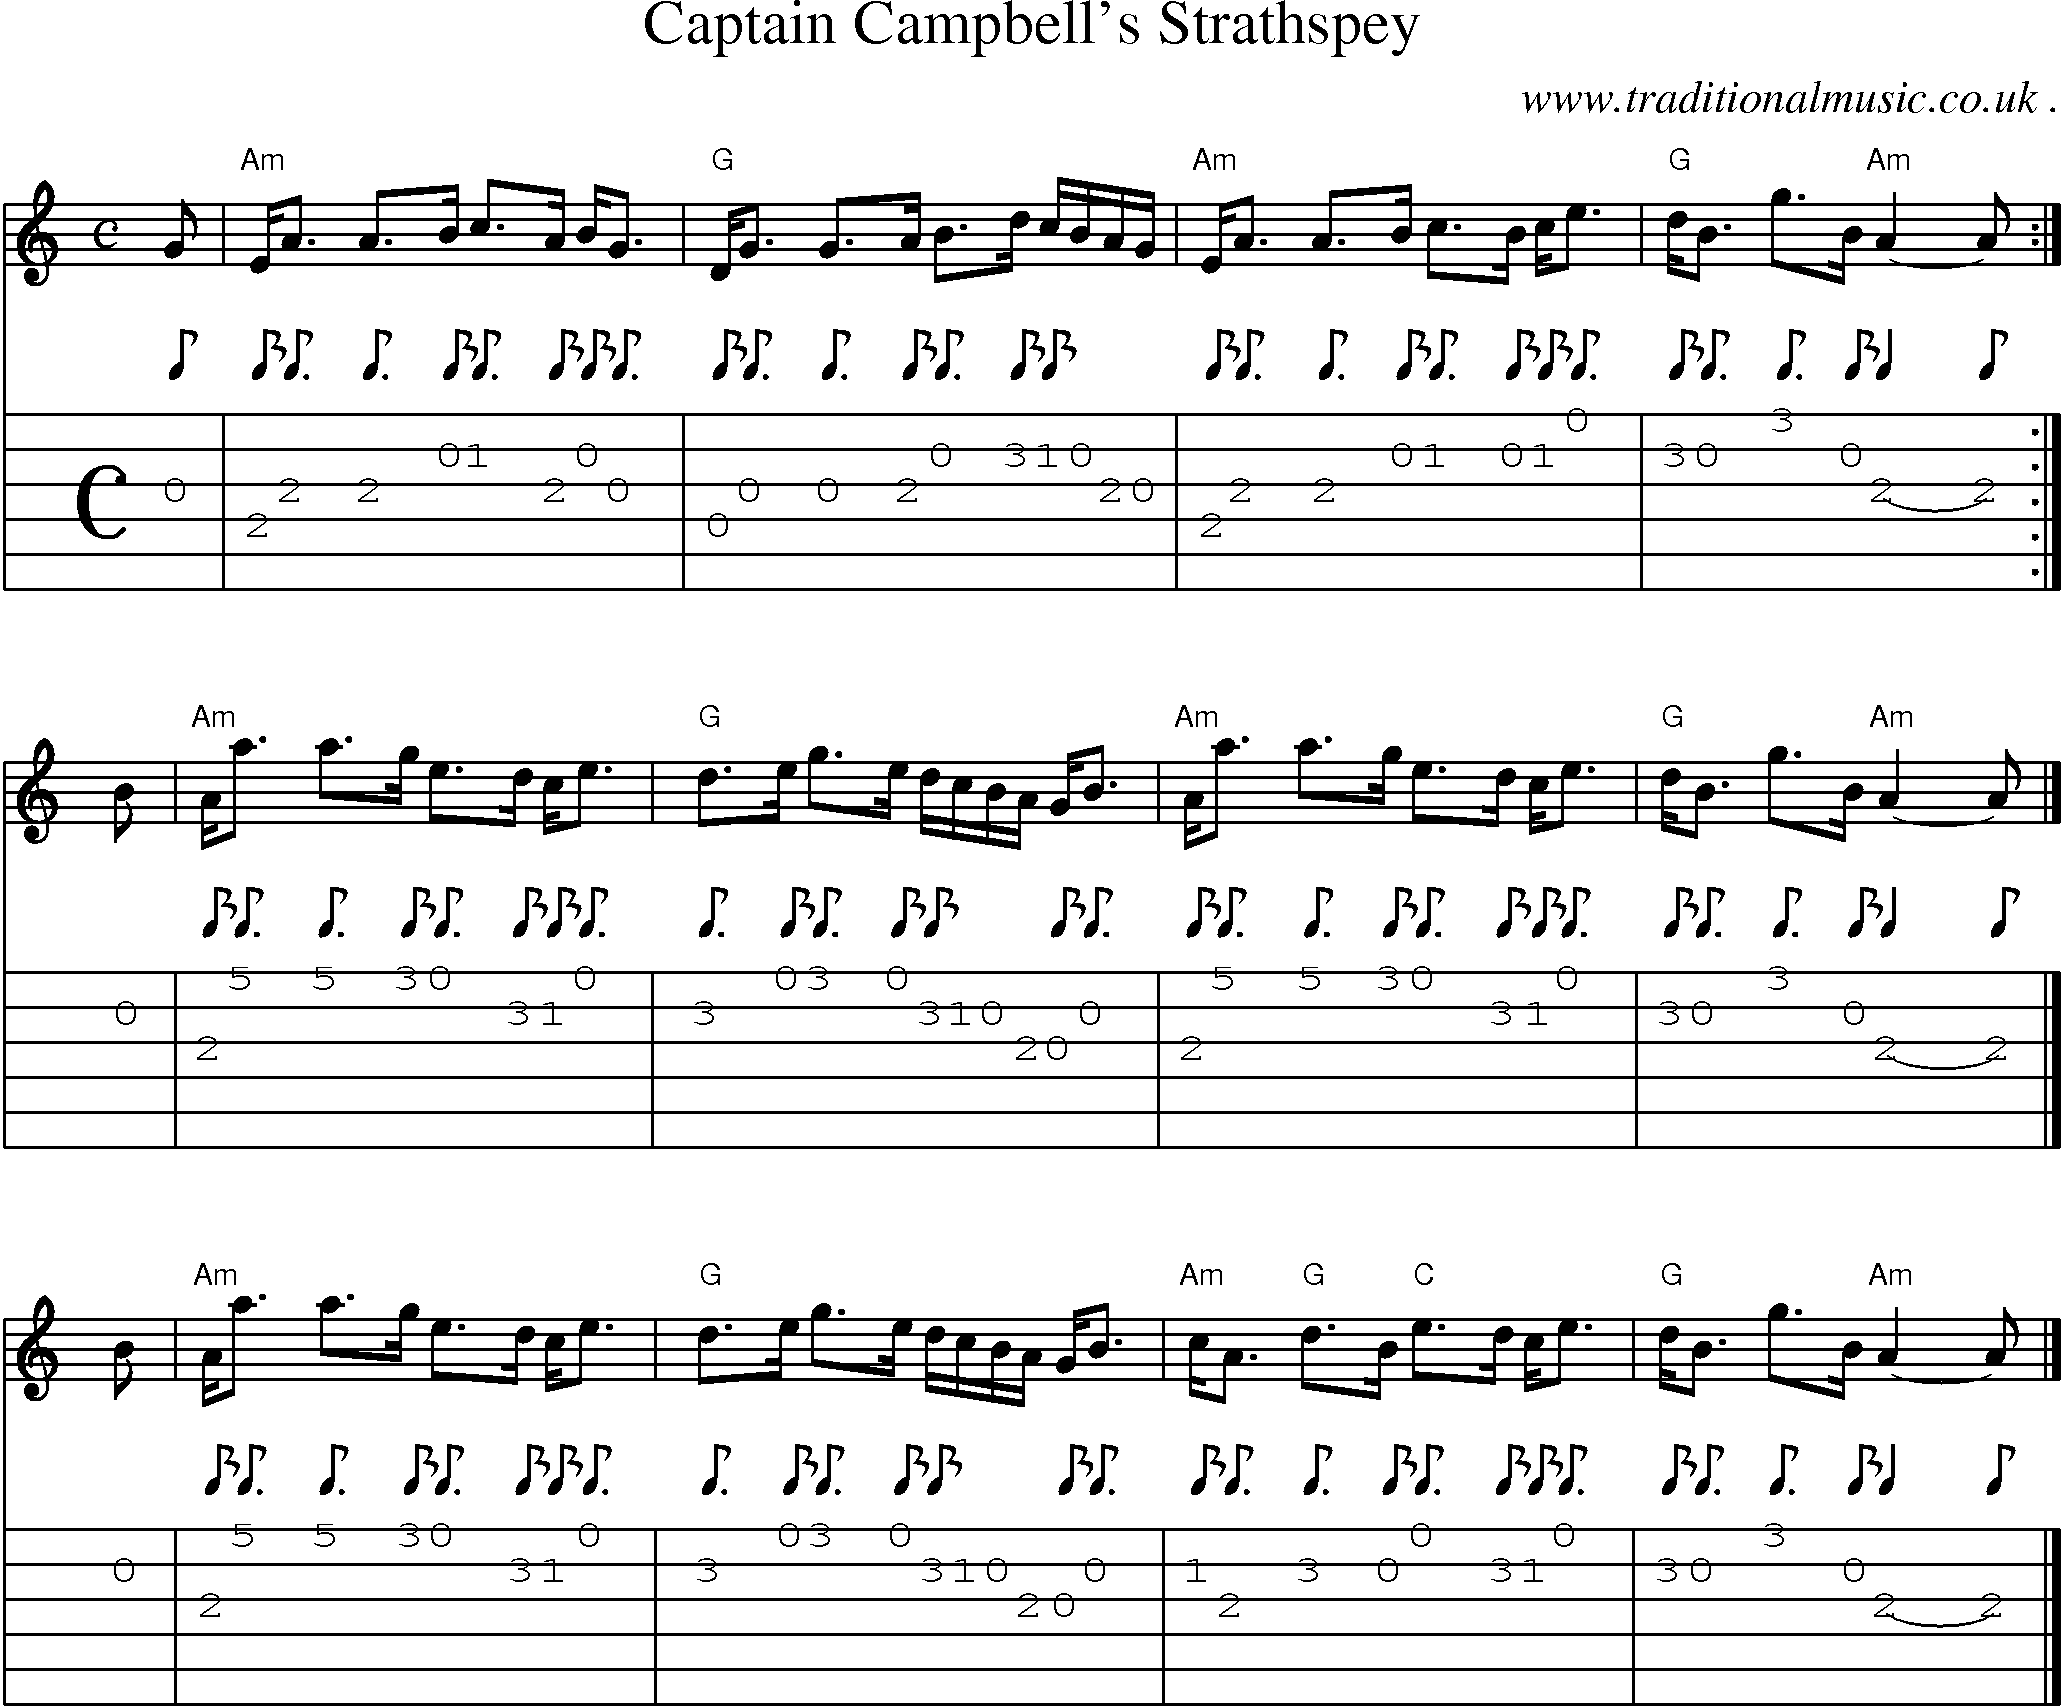 Sheet-music  score, Chords and Guitar Tabs for Captain Campbells Strathspey